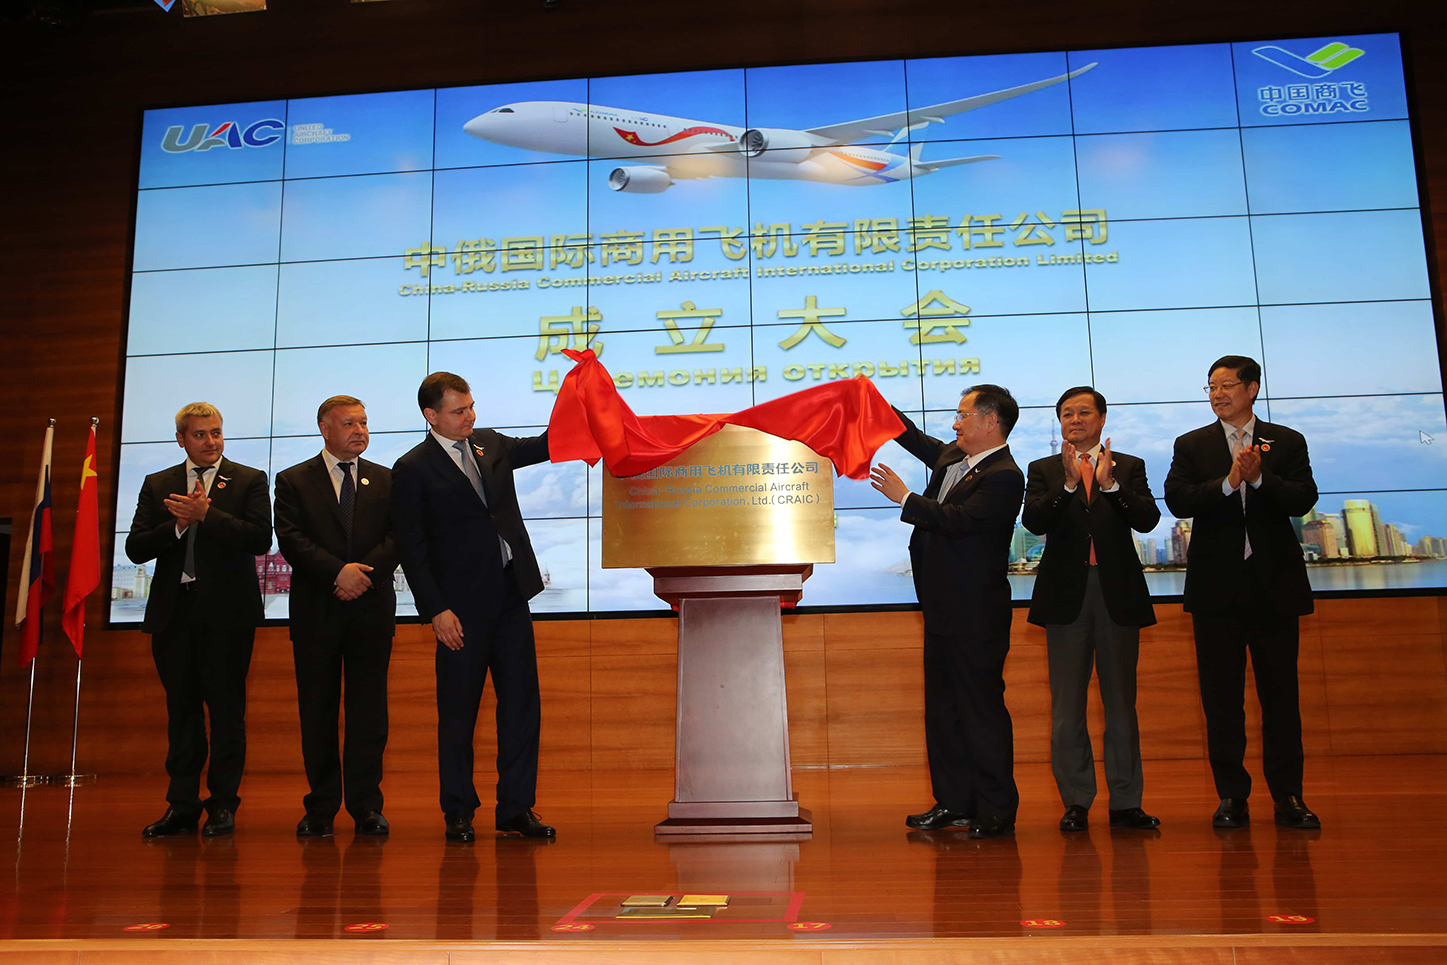 COMAC and UAC held an establishment ceremony for the Long Range Wide Body Commercial Aircraft Program Joint Venture